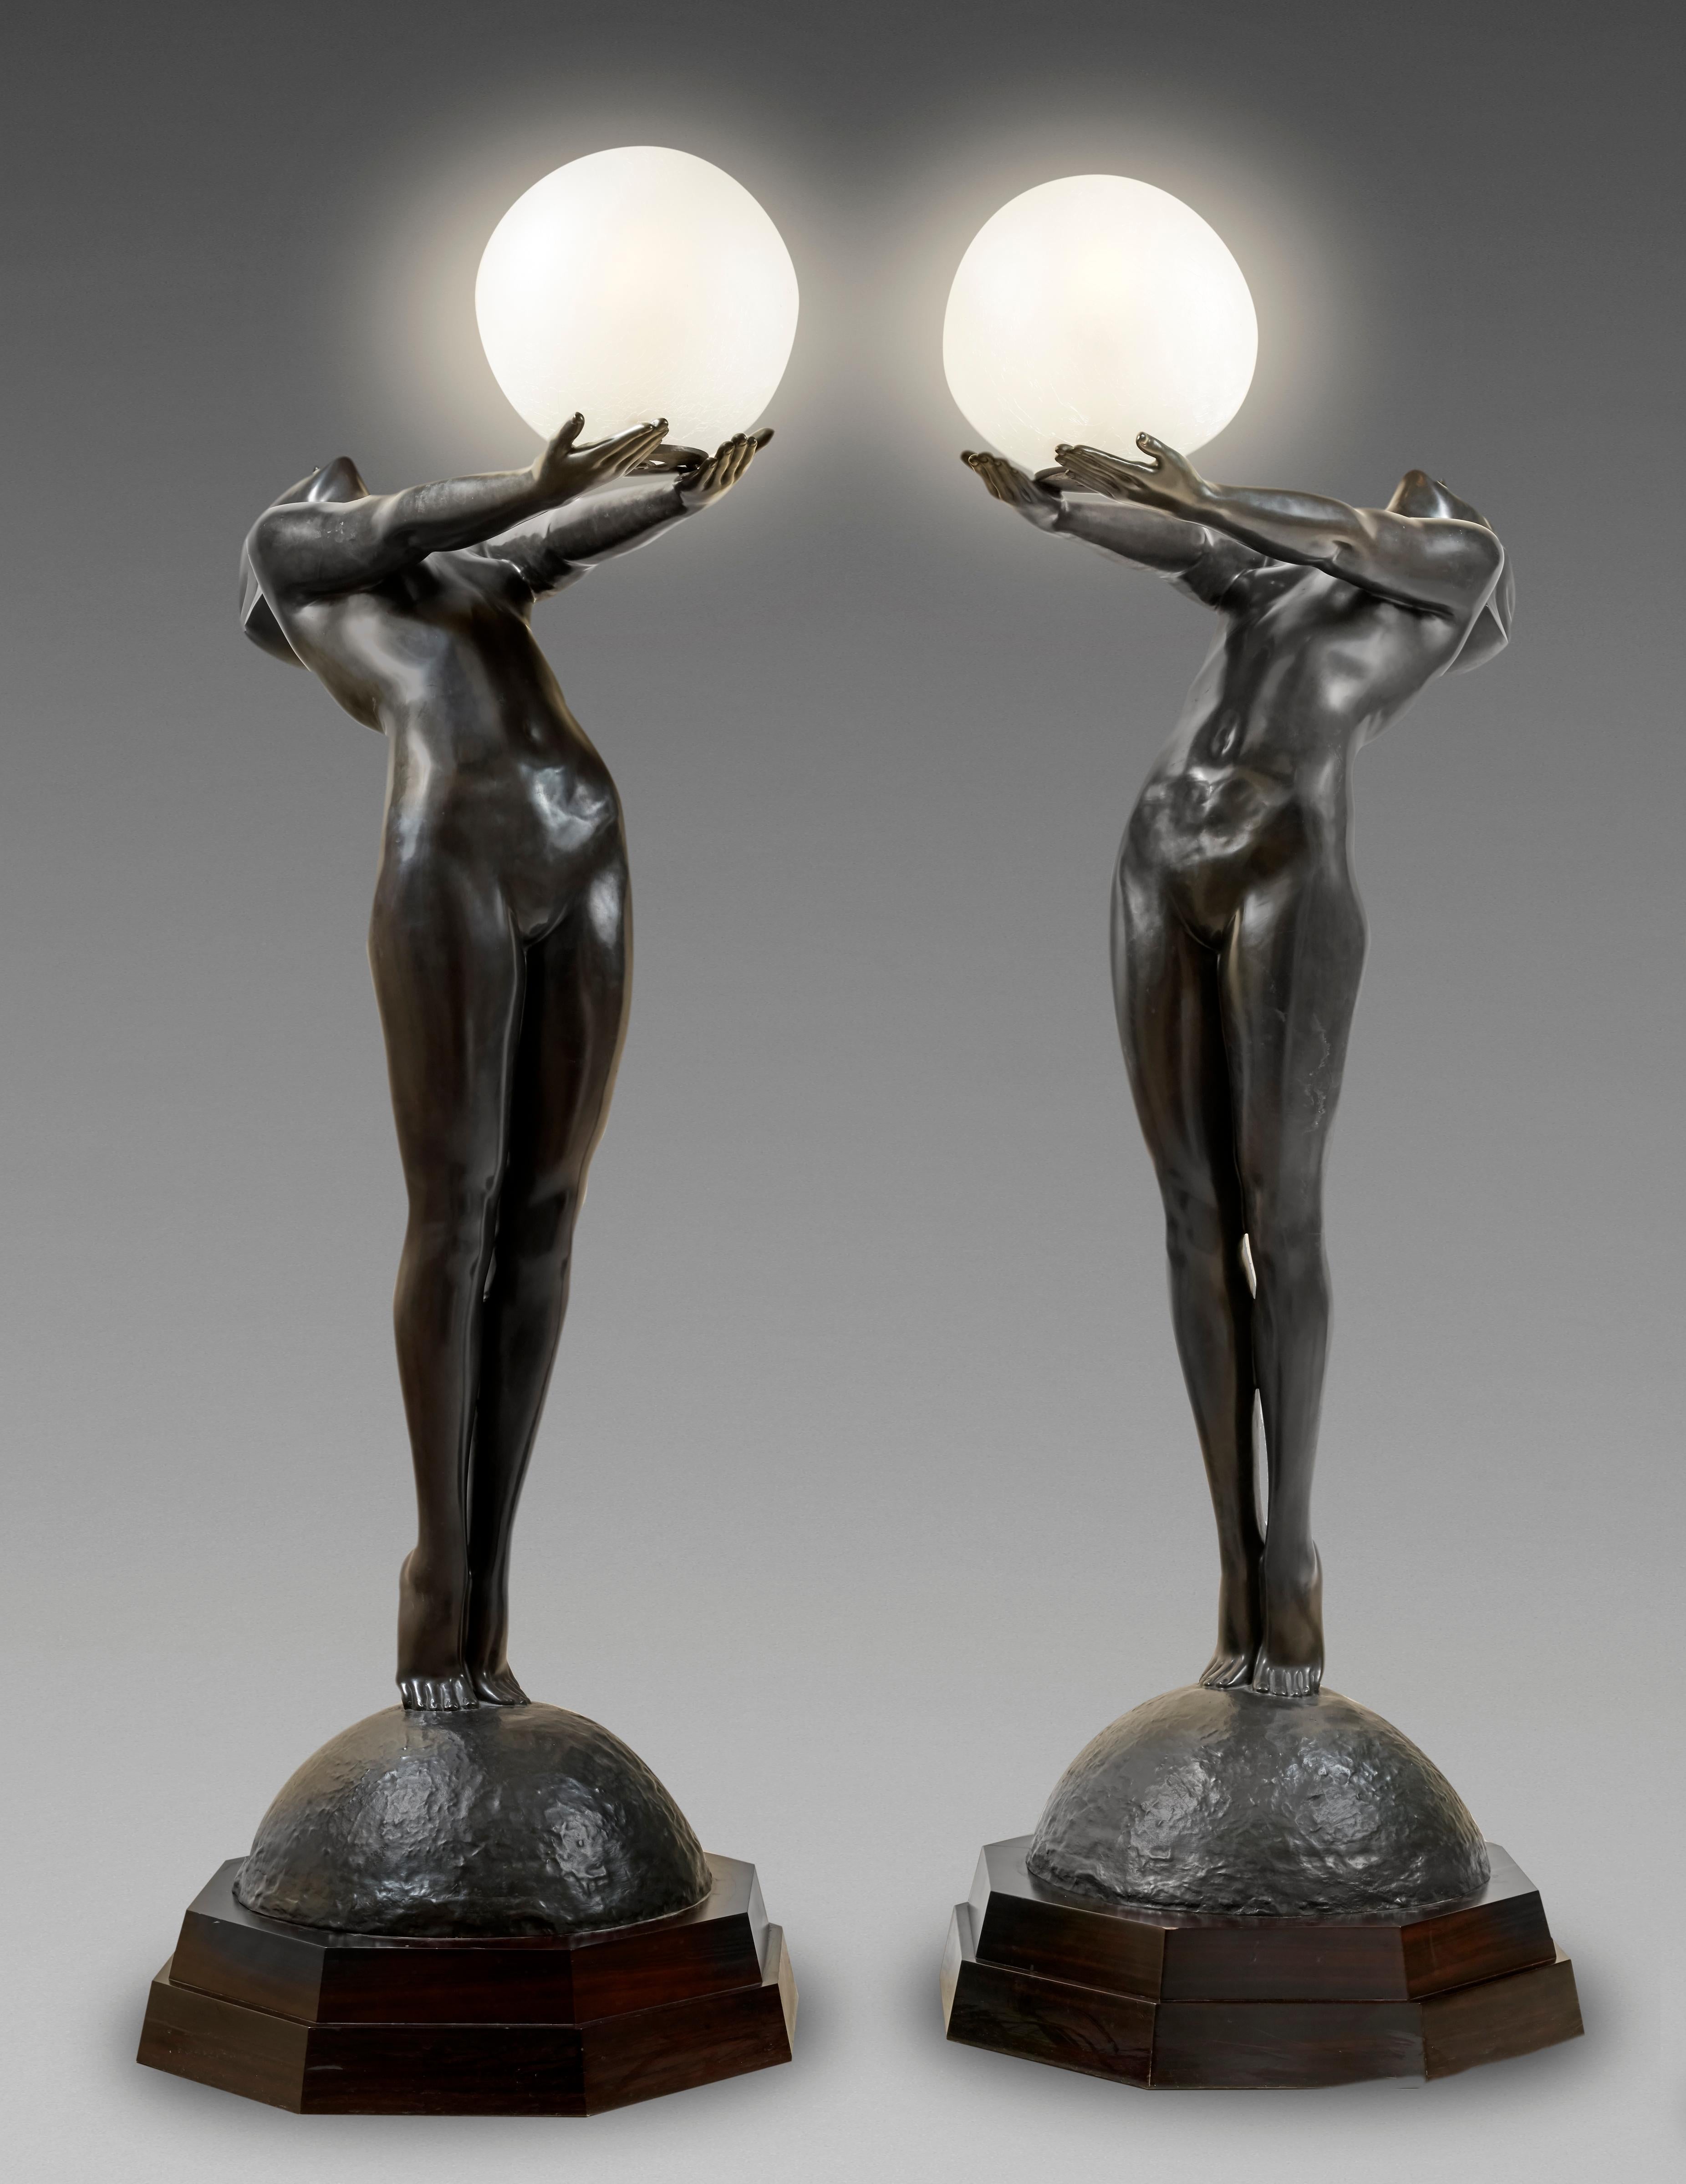 Max Le Verrier, 
1891-1973, French

Clarté, 20th century
Signed and sealed “Le Verrier Paris” 
Bronzes with dark patina

Max Le Verrier (1891-1973): He was a French sculptor best known for his elegant figurative works. Whether representing